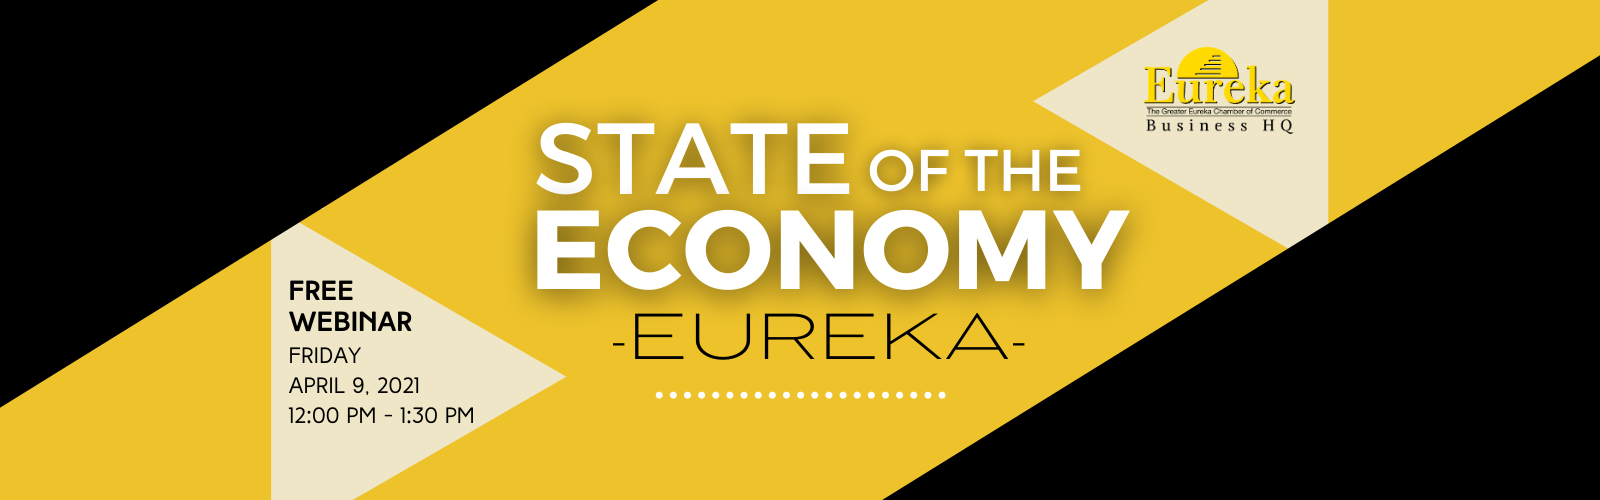 eureka chamber state of the economy event humboldt county 